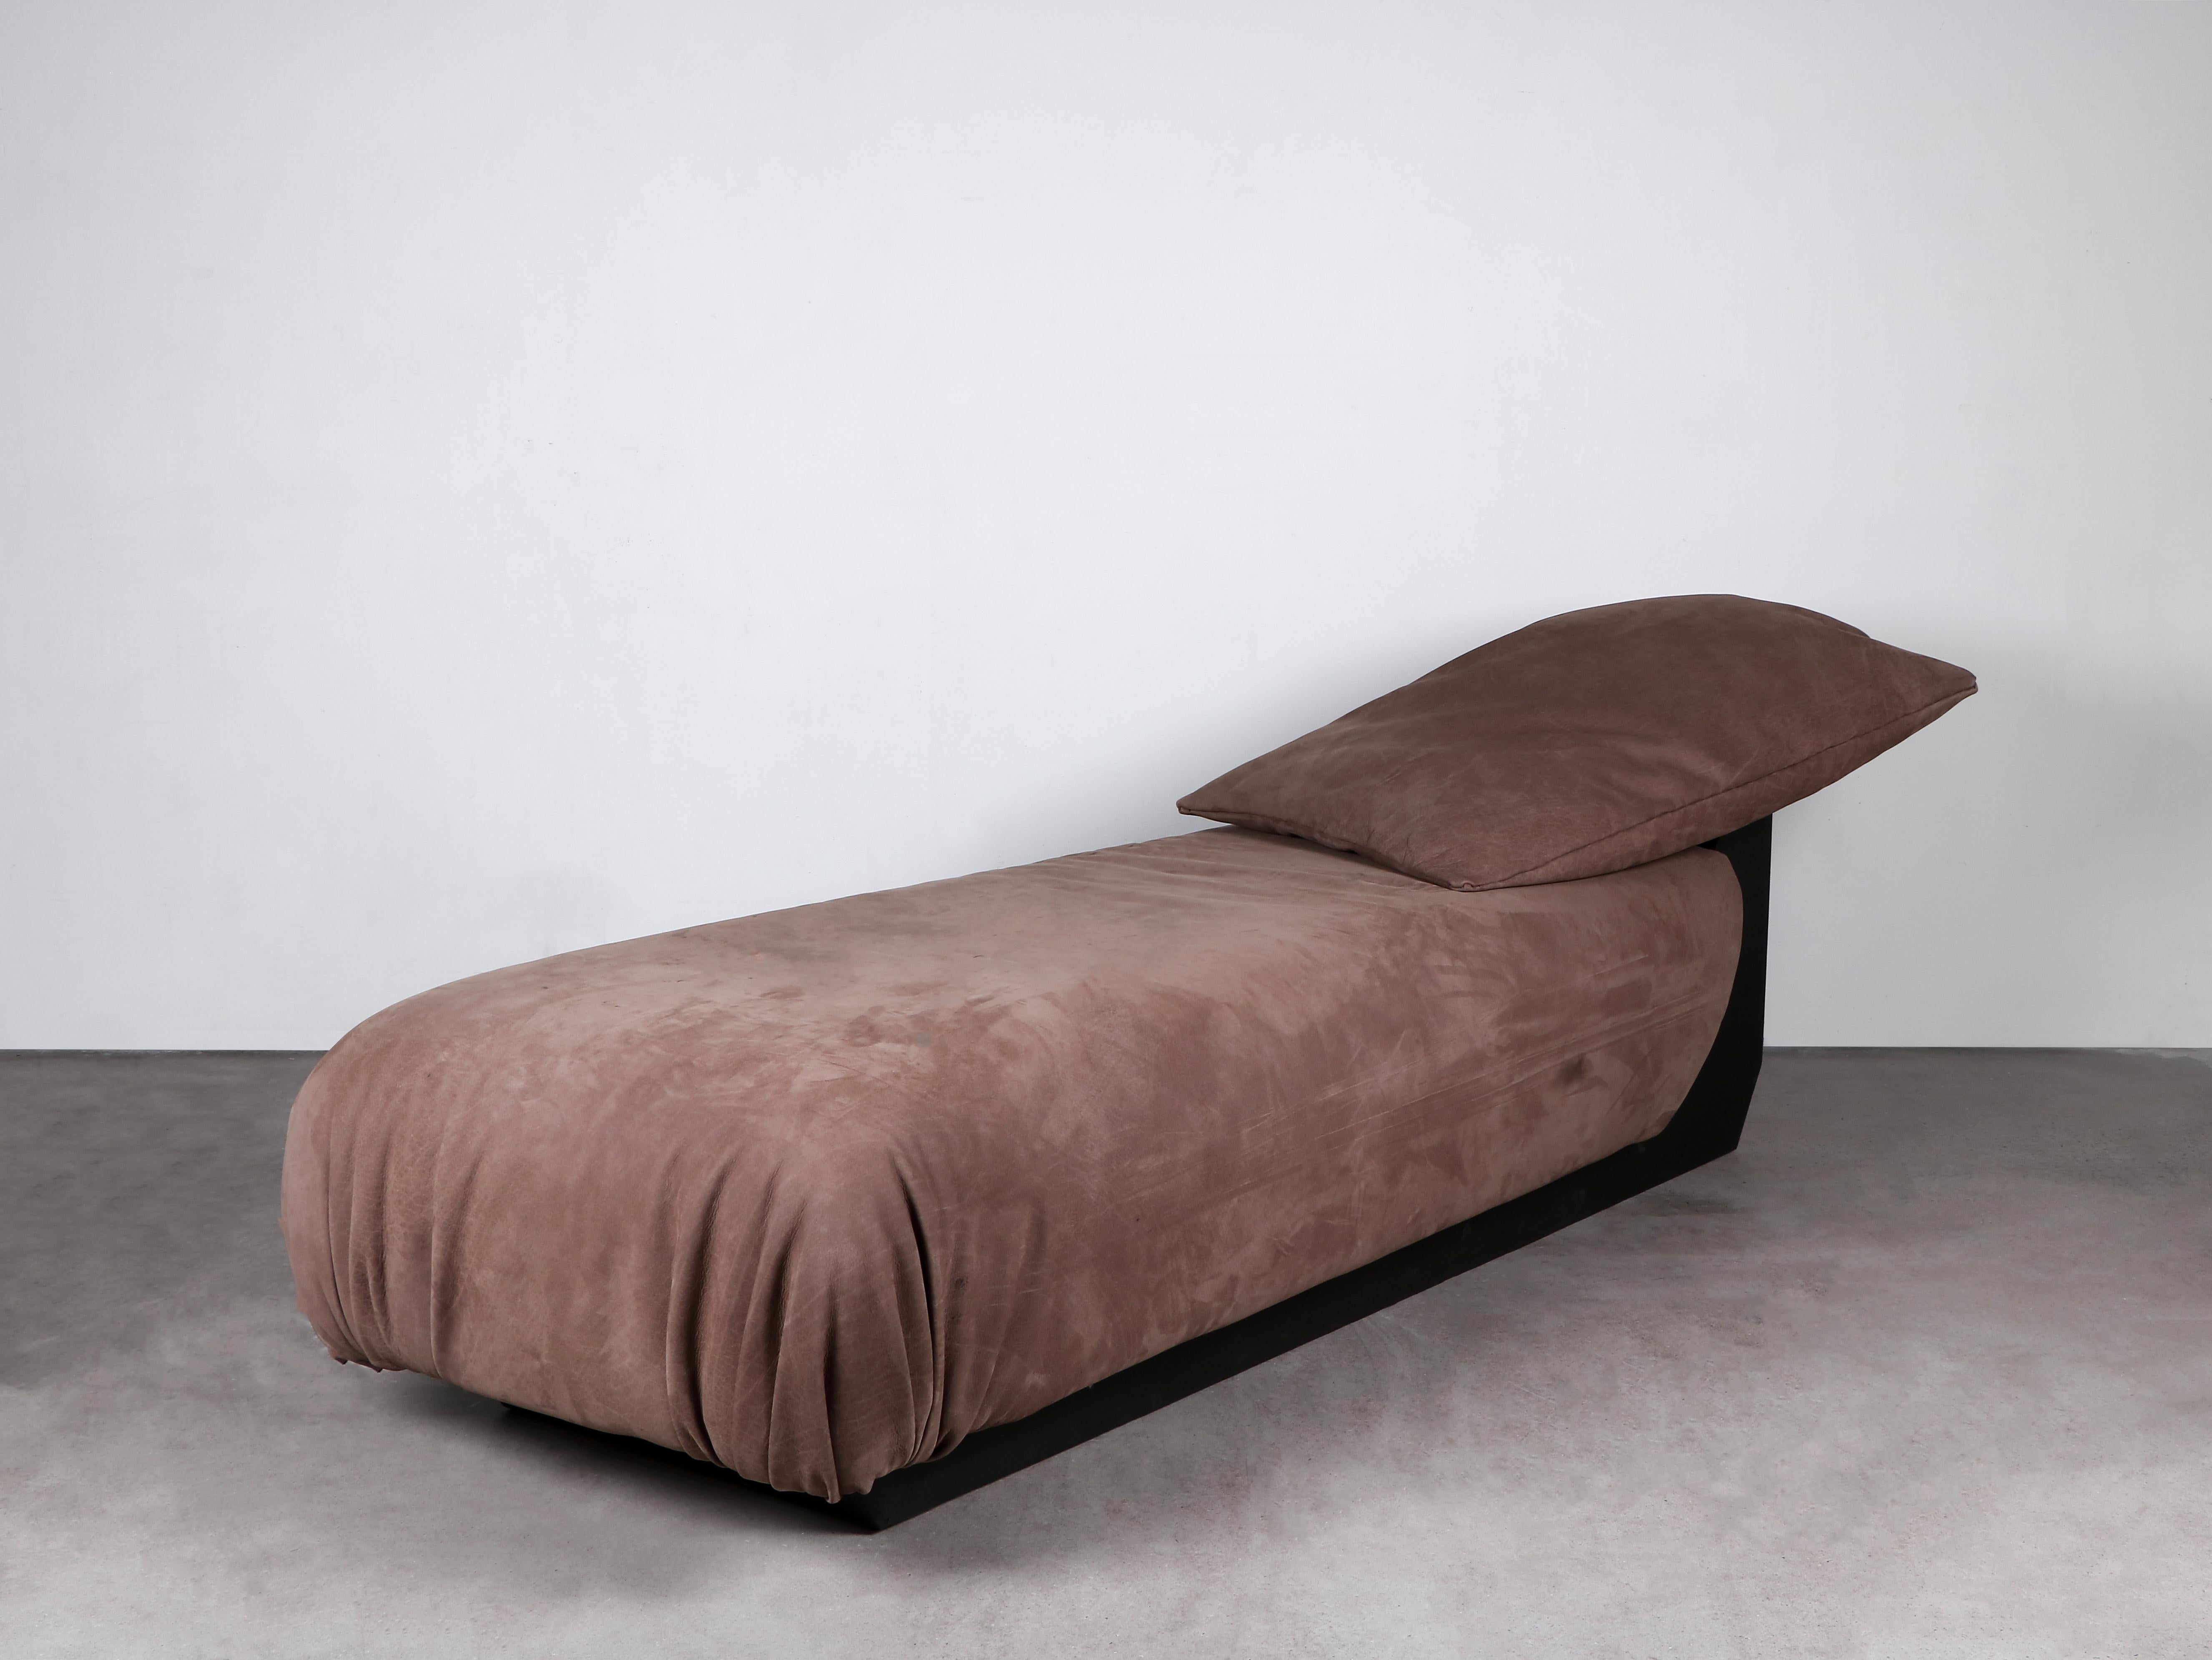 Brutal Daybed by Lucas Morten
Limited Edition of 12 + 1 AP
Signed
Dimensions: W180 x D40 H60 cm
Material: HAND-WAXED PLYWOOD AND LEATHER

Objects comes with a 